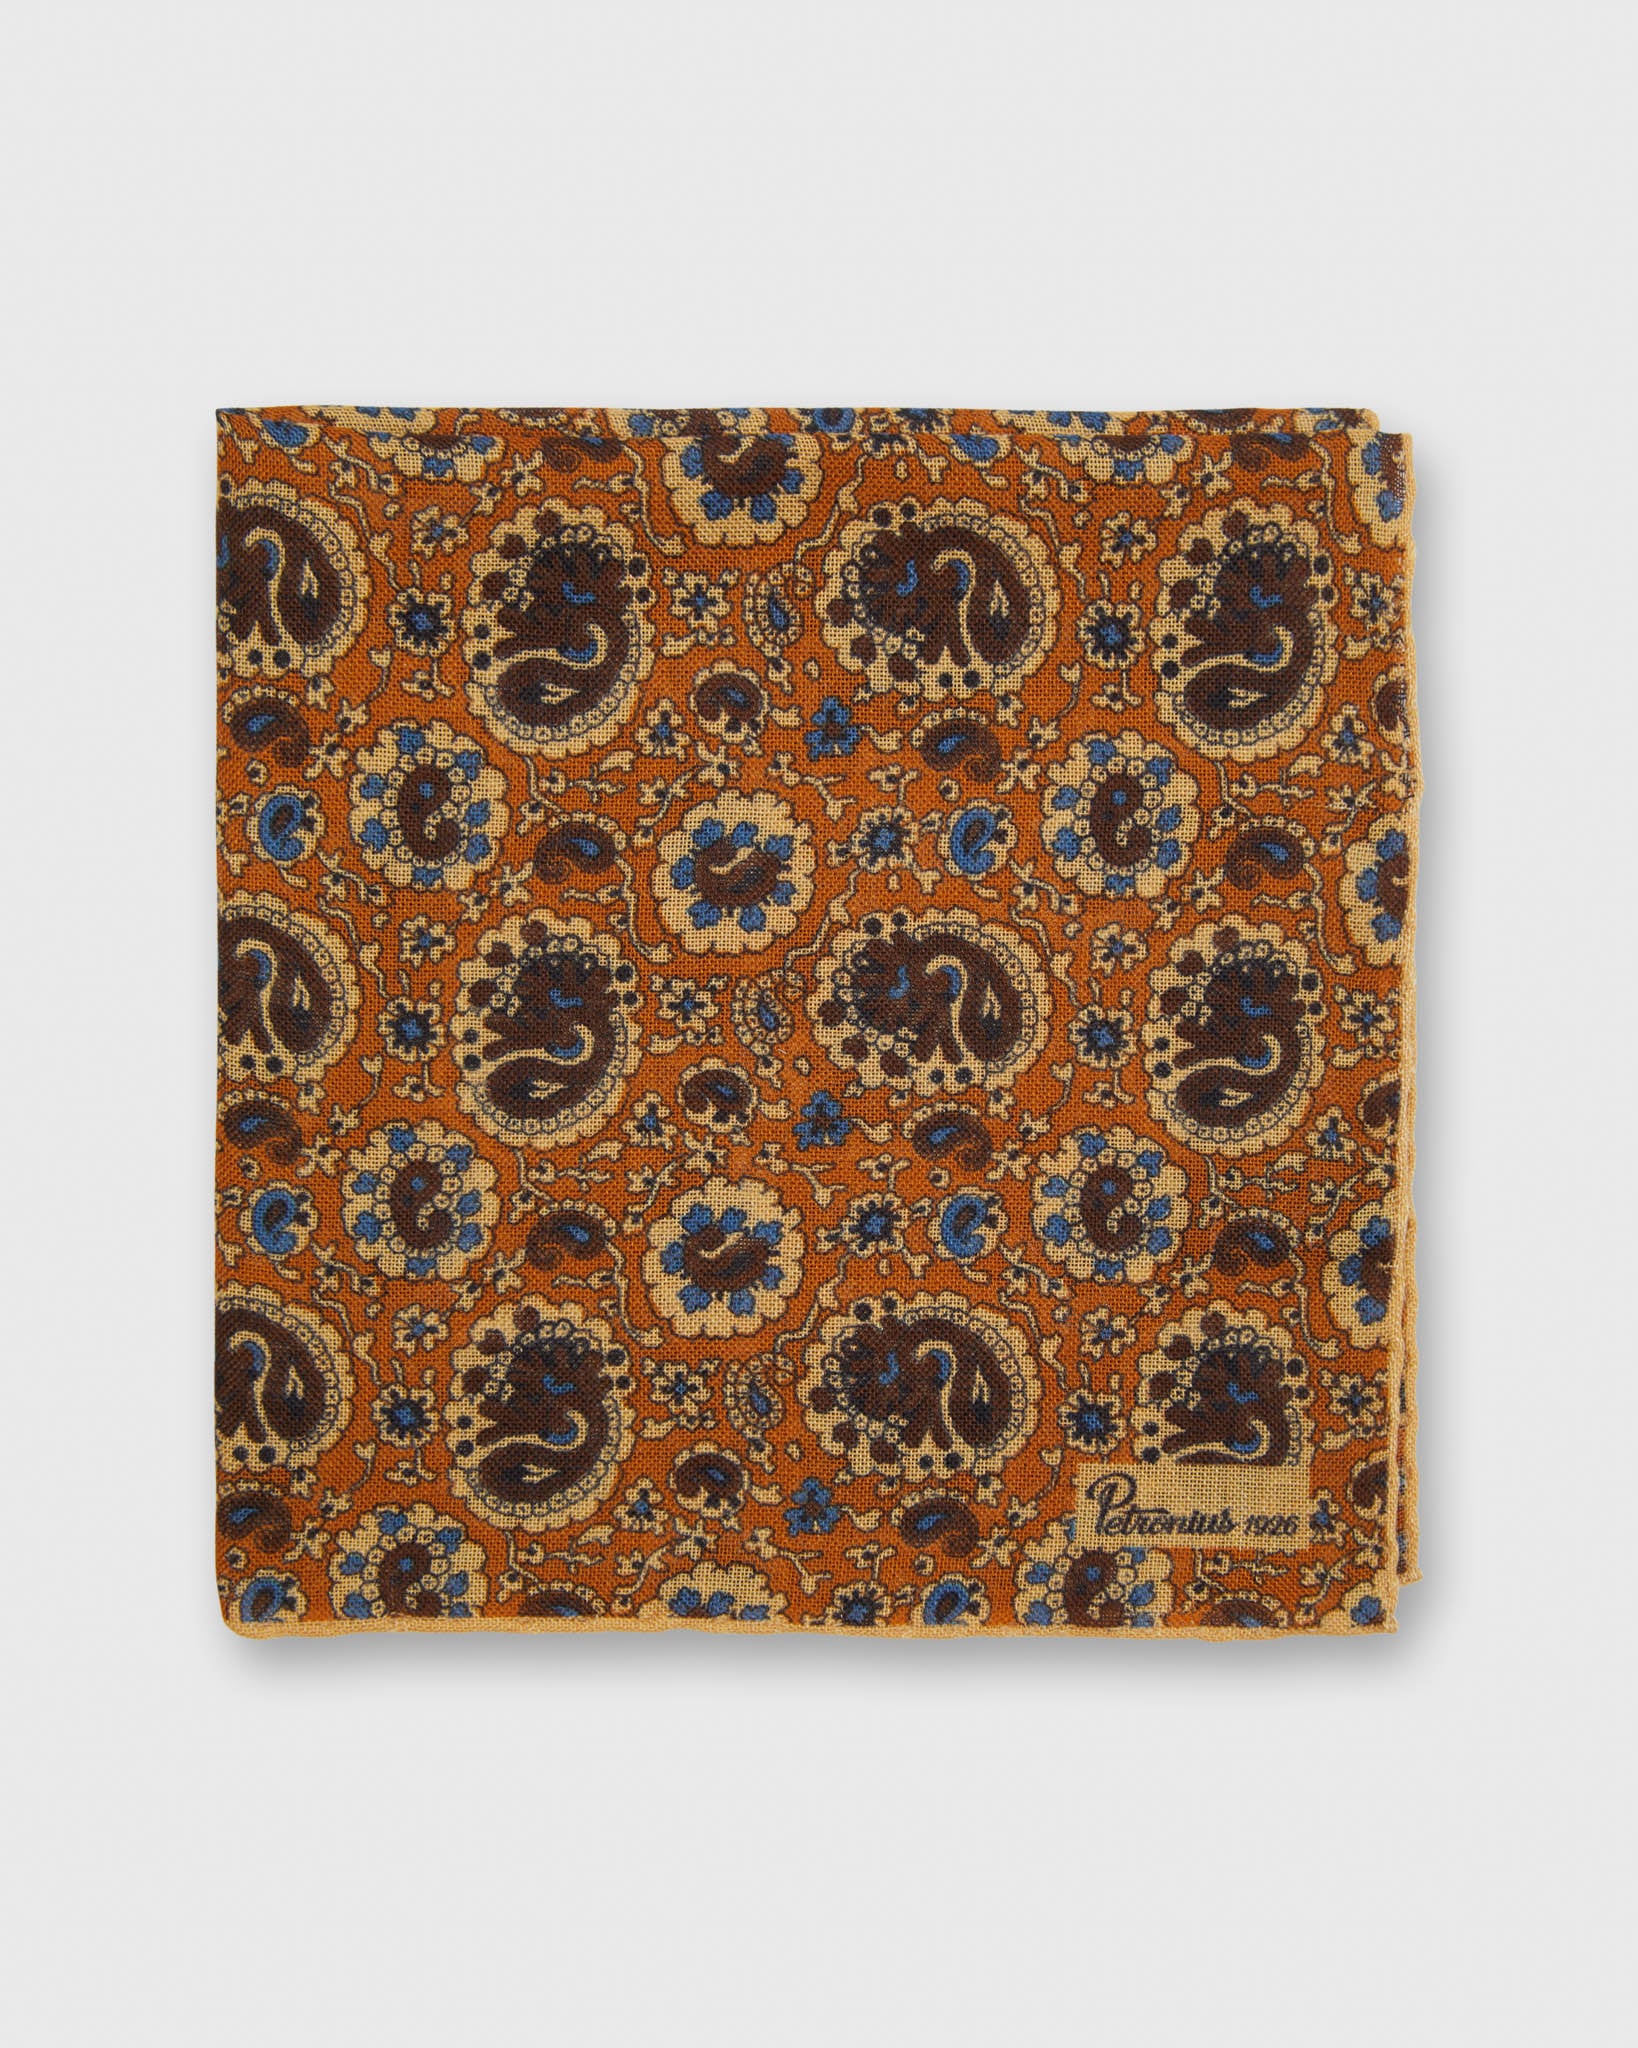 Hand-Rolled Pocket Square in Caramel Paisley